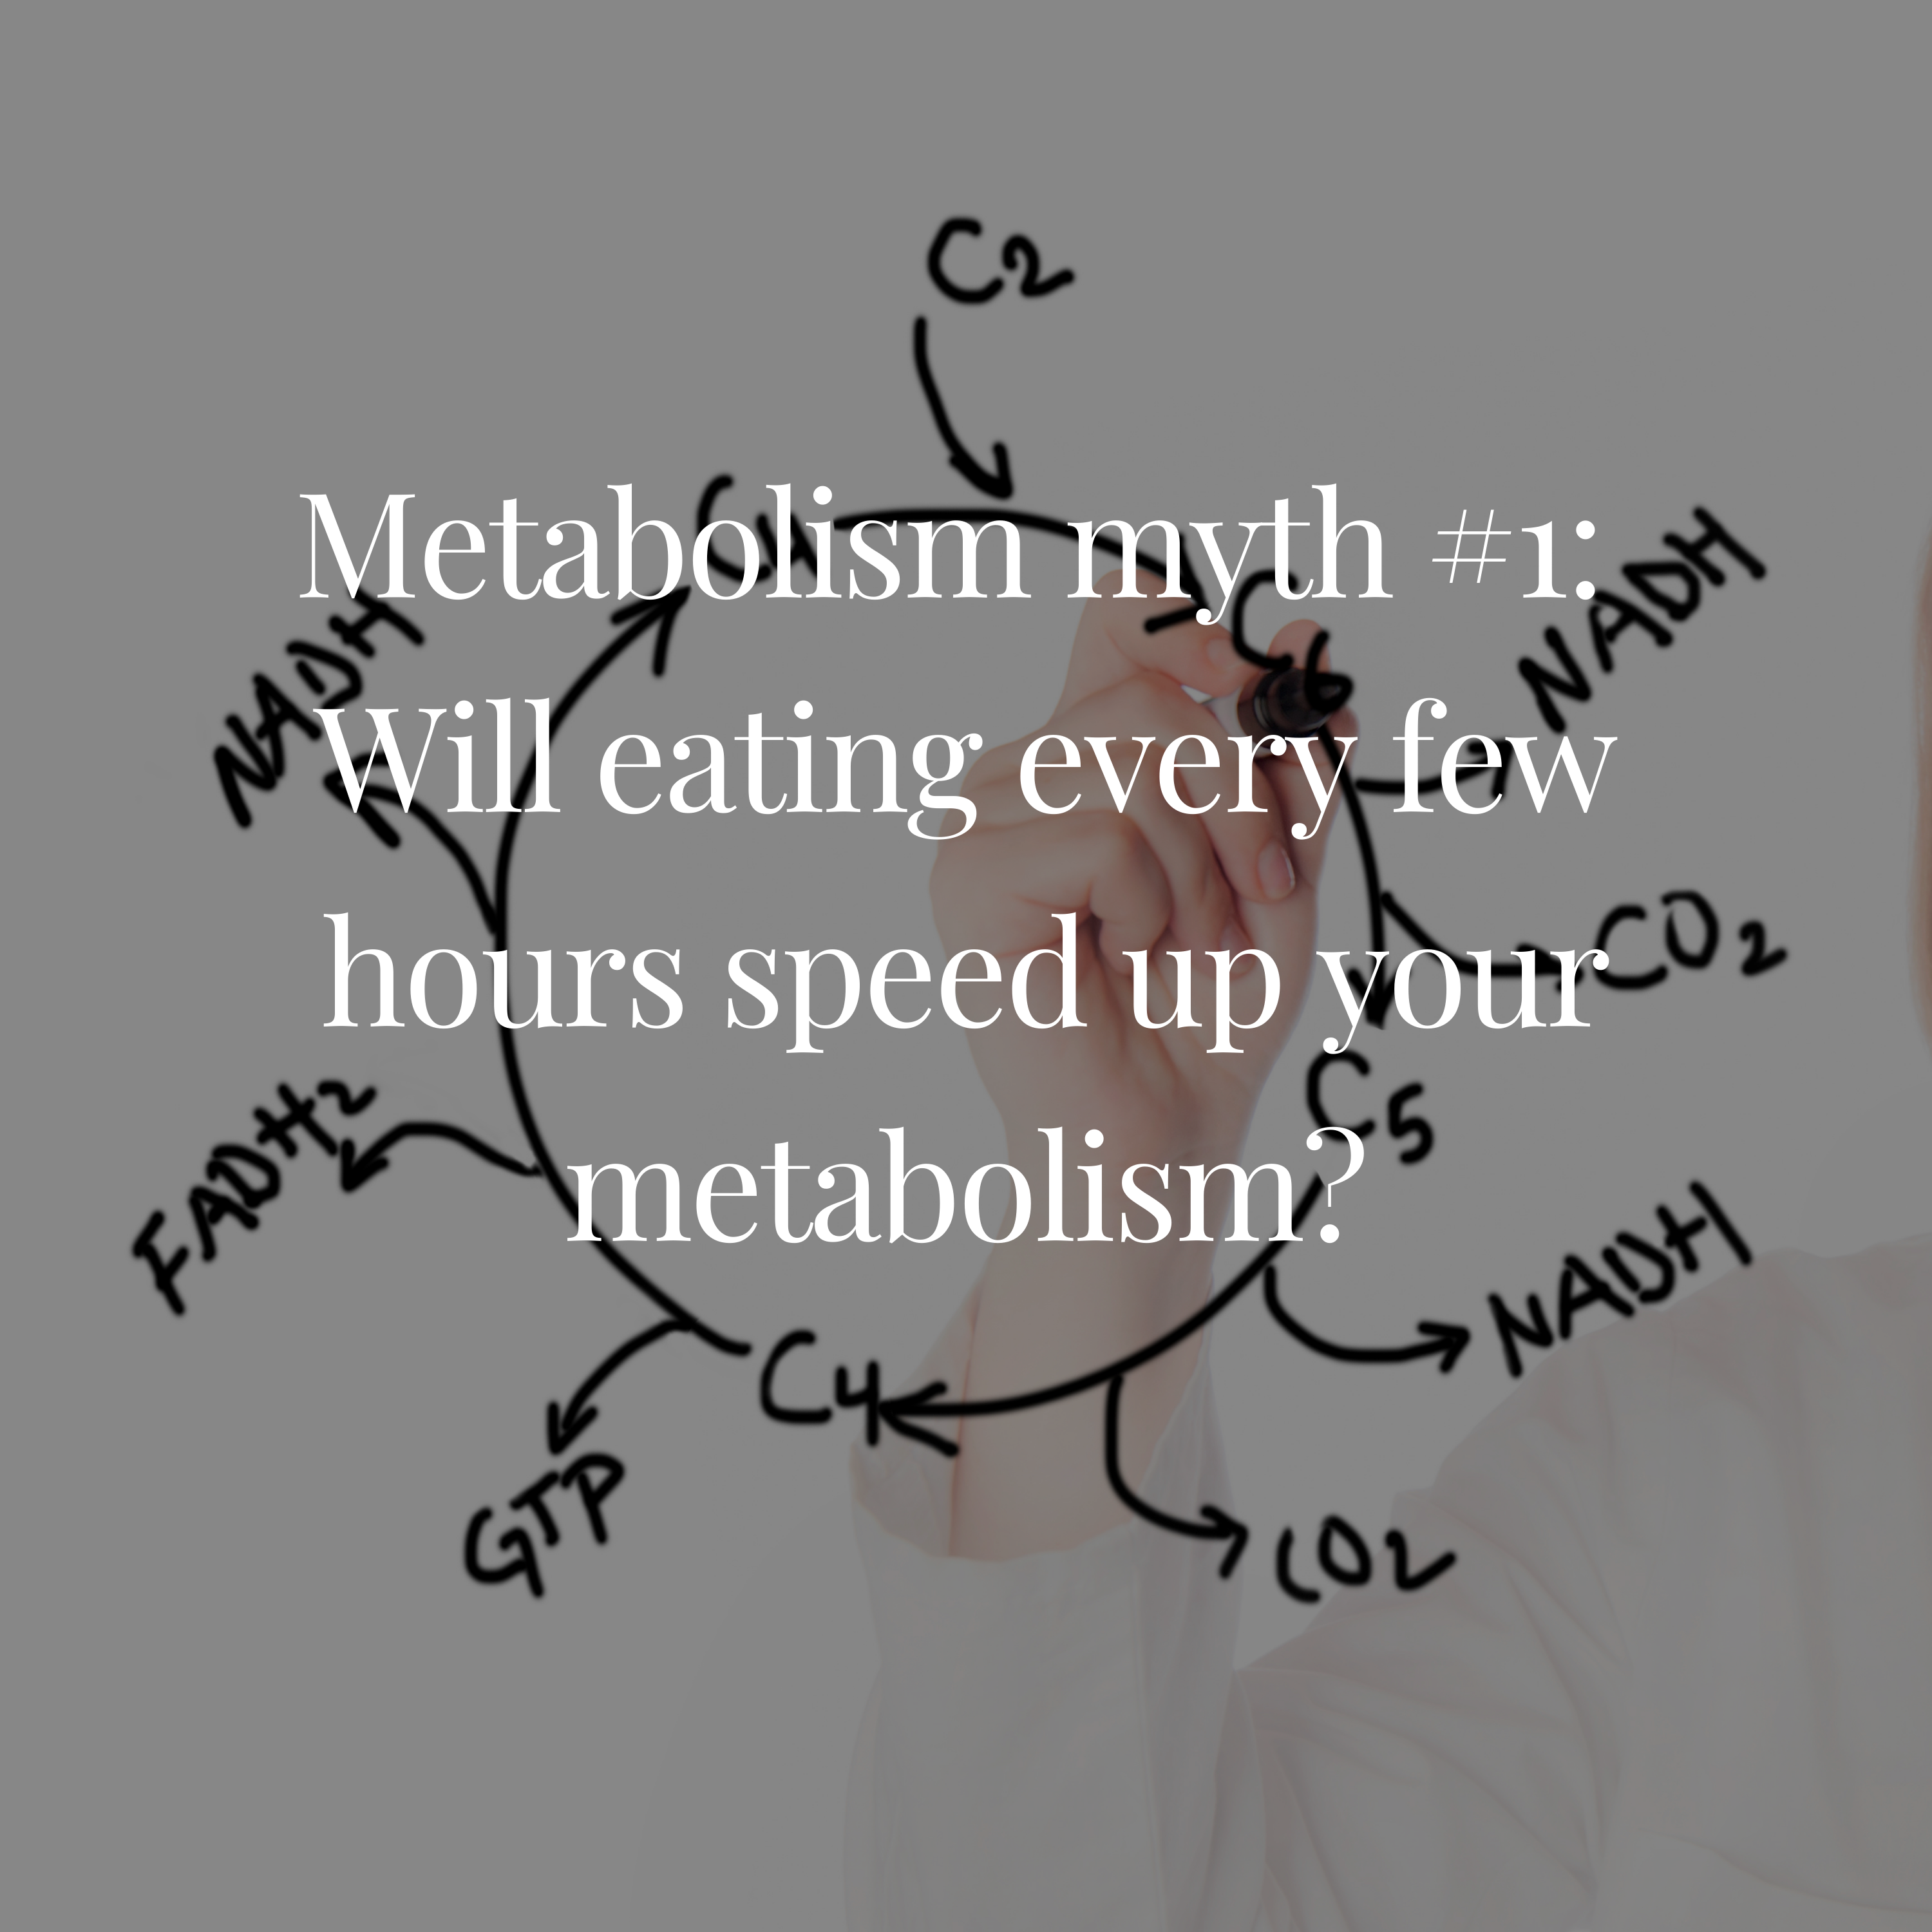 Metabolism myth #1:  Will eating every few hours speed up your metabolism?